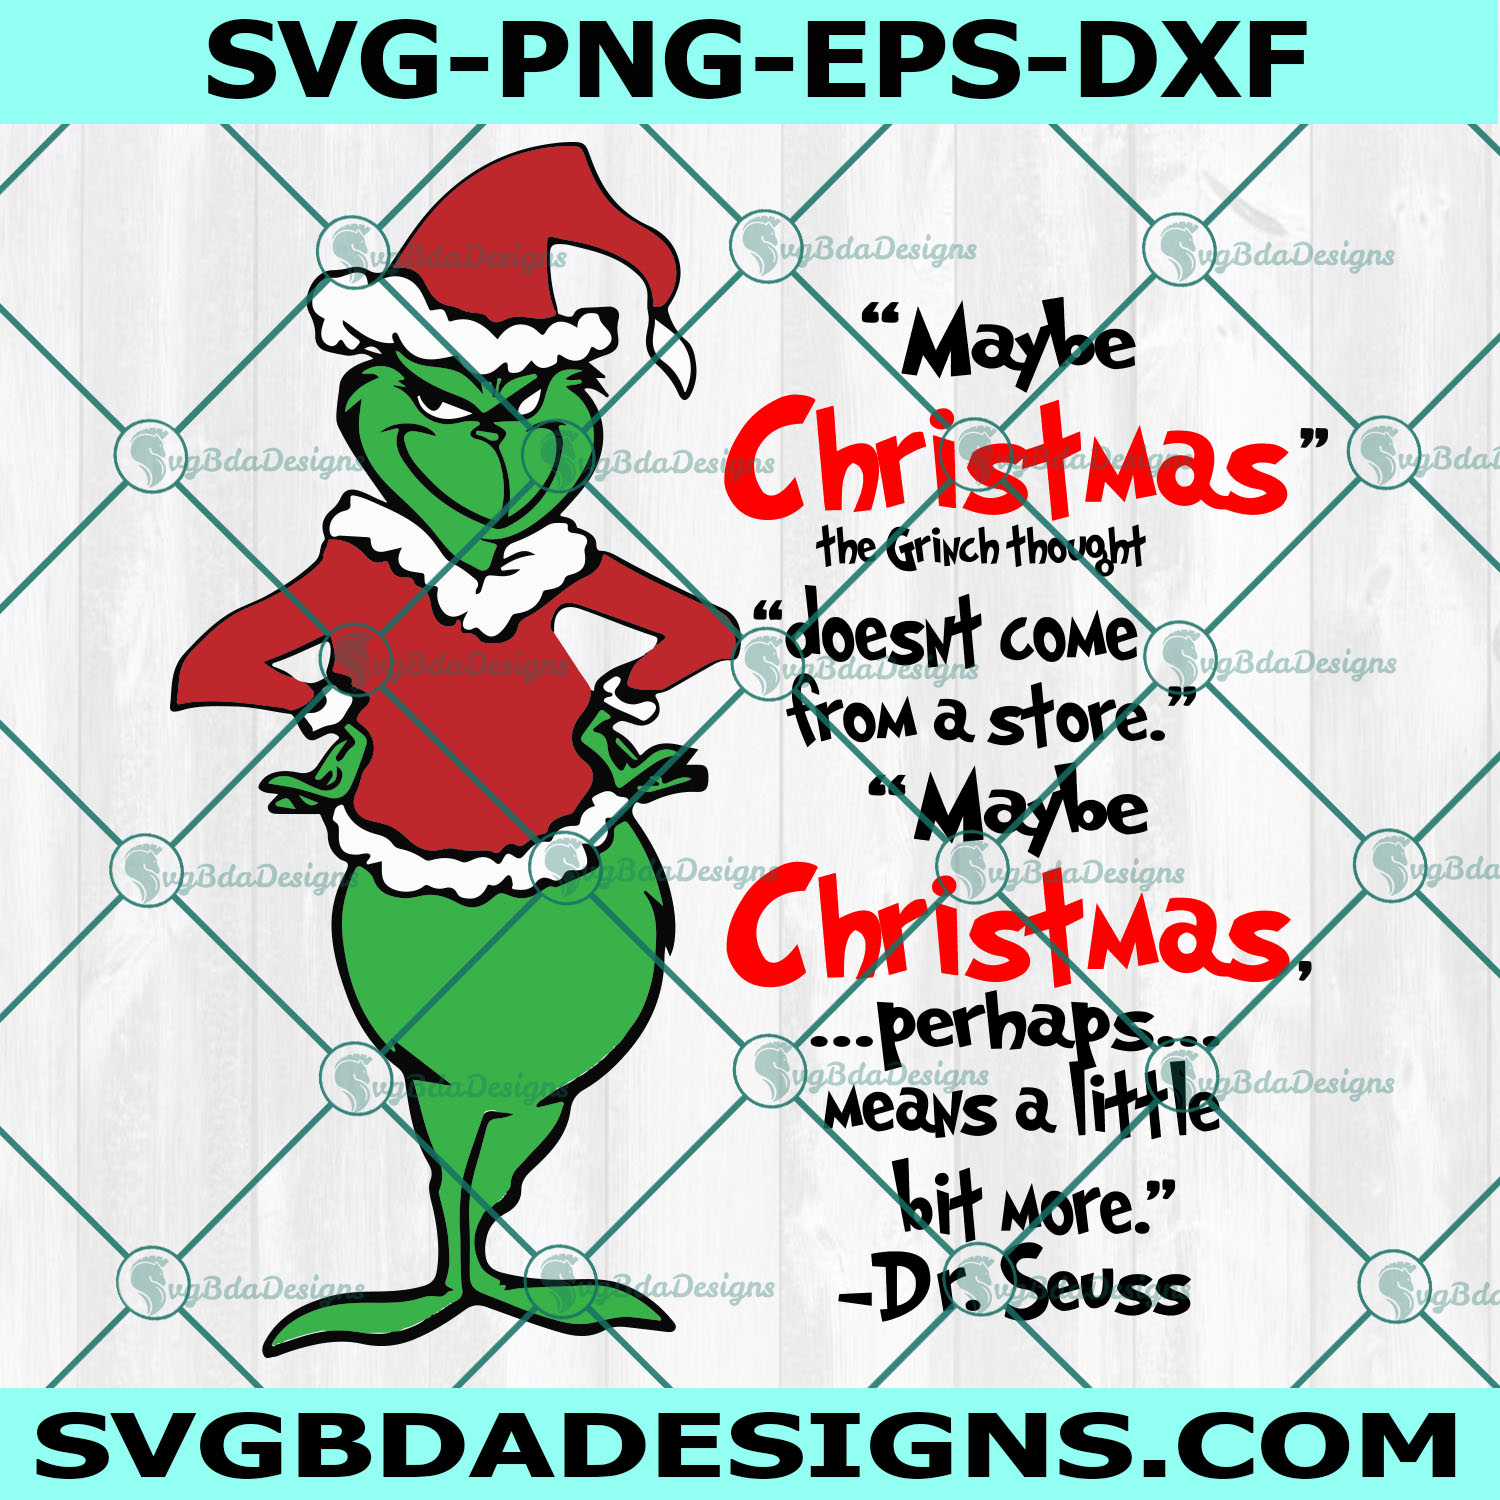 Maybe Christmas doesn't come from a store maybe Christmas perhaps means a little bit more Svg, Grinch Maybe Christmas Svg, The Grinch Thoughrt SVG, Christmas Svg, Cricut, Digital Download